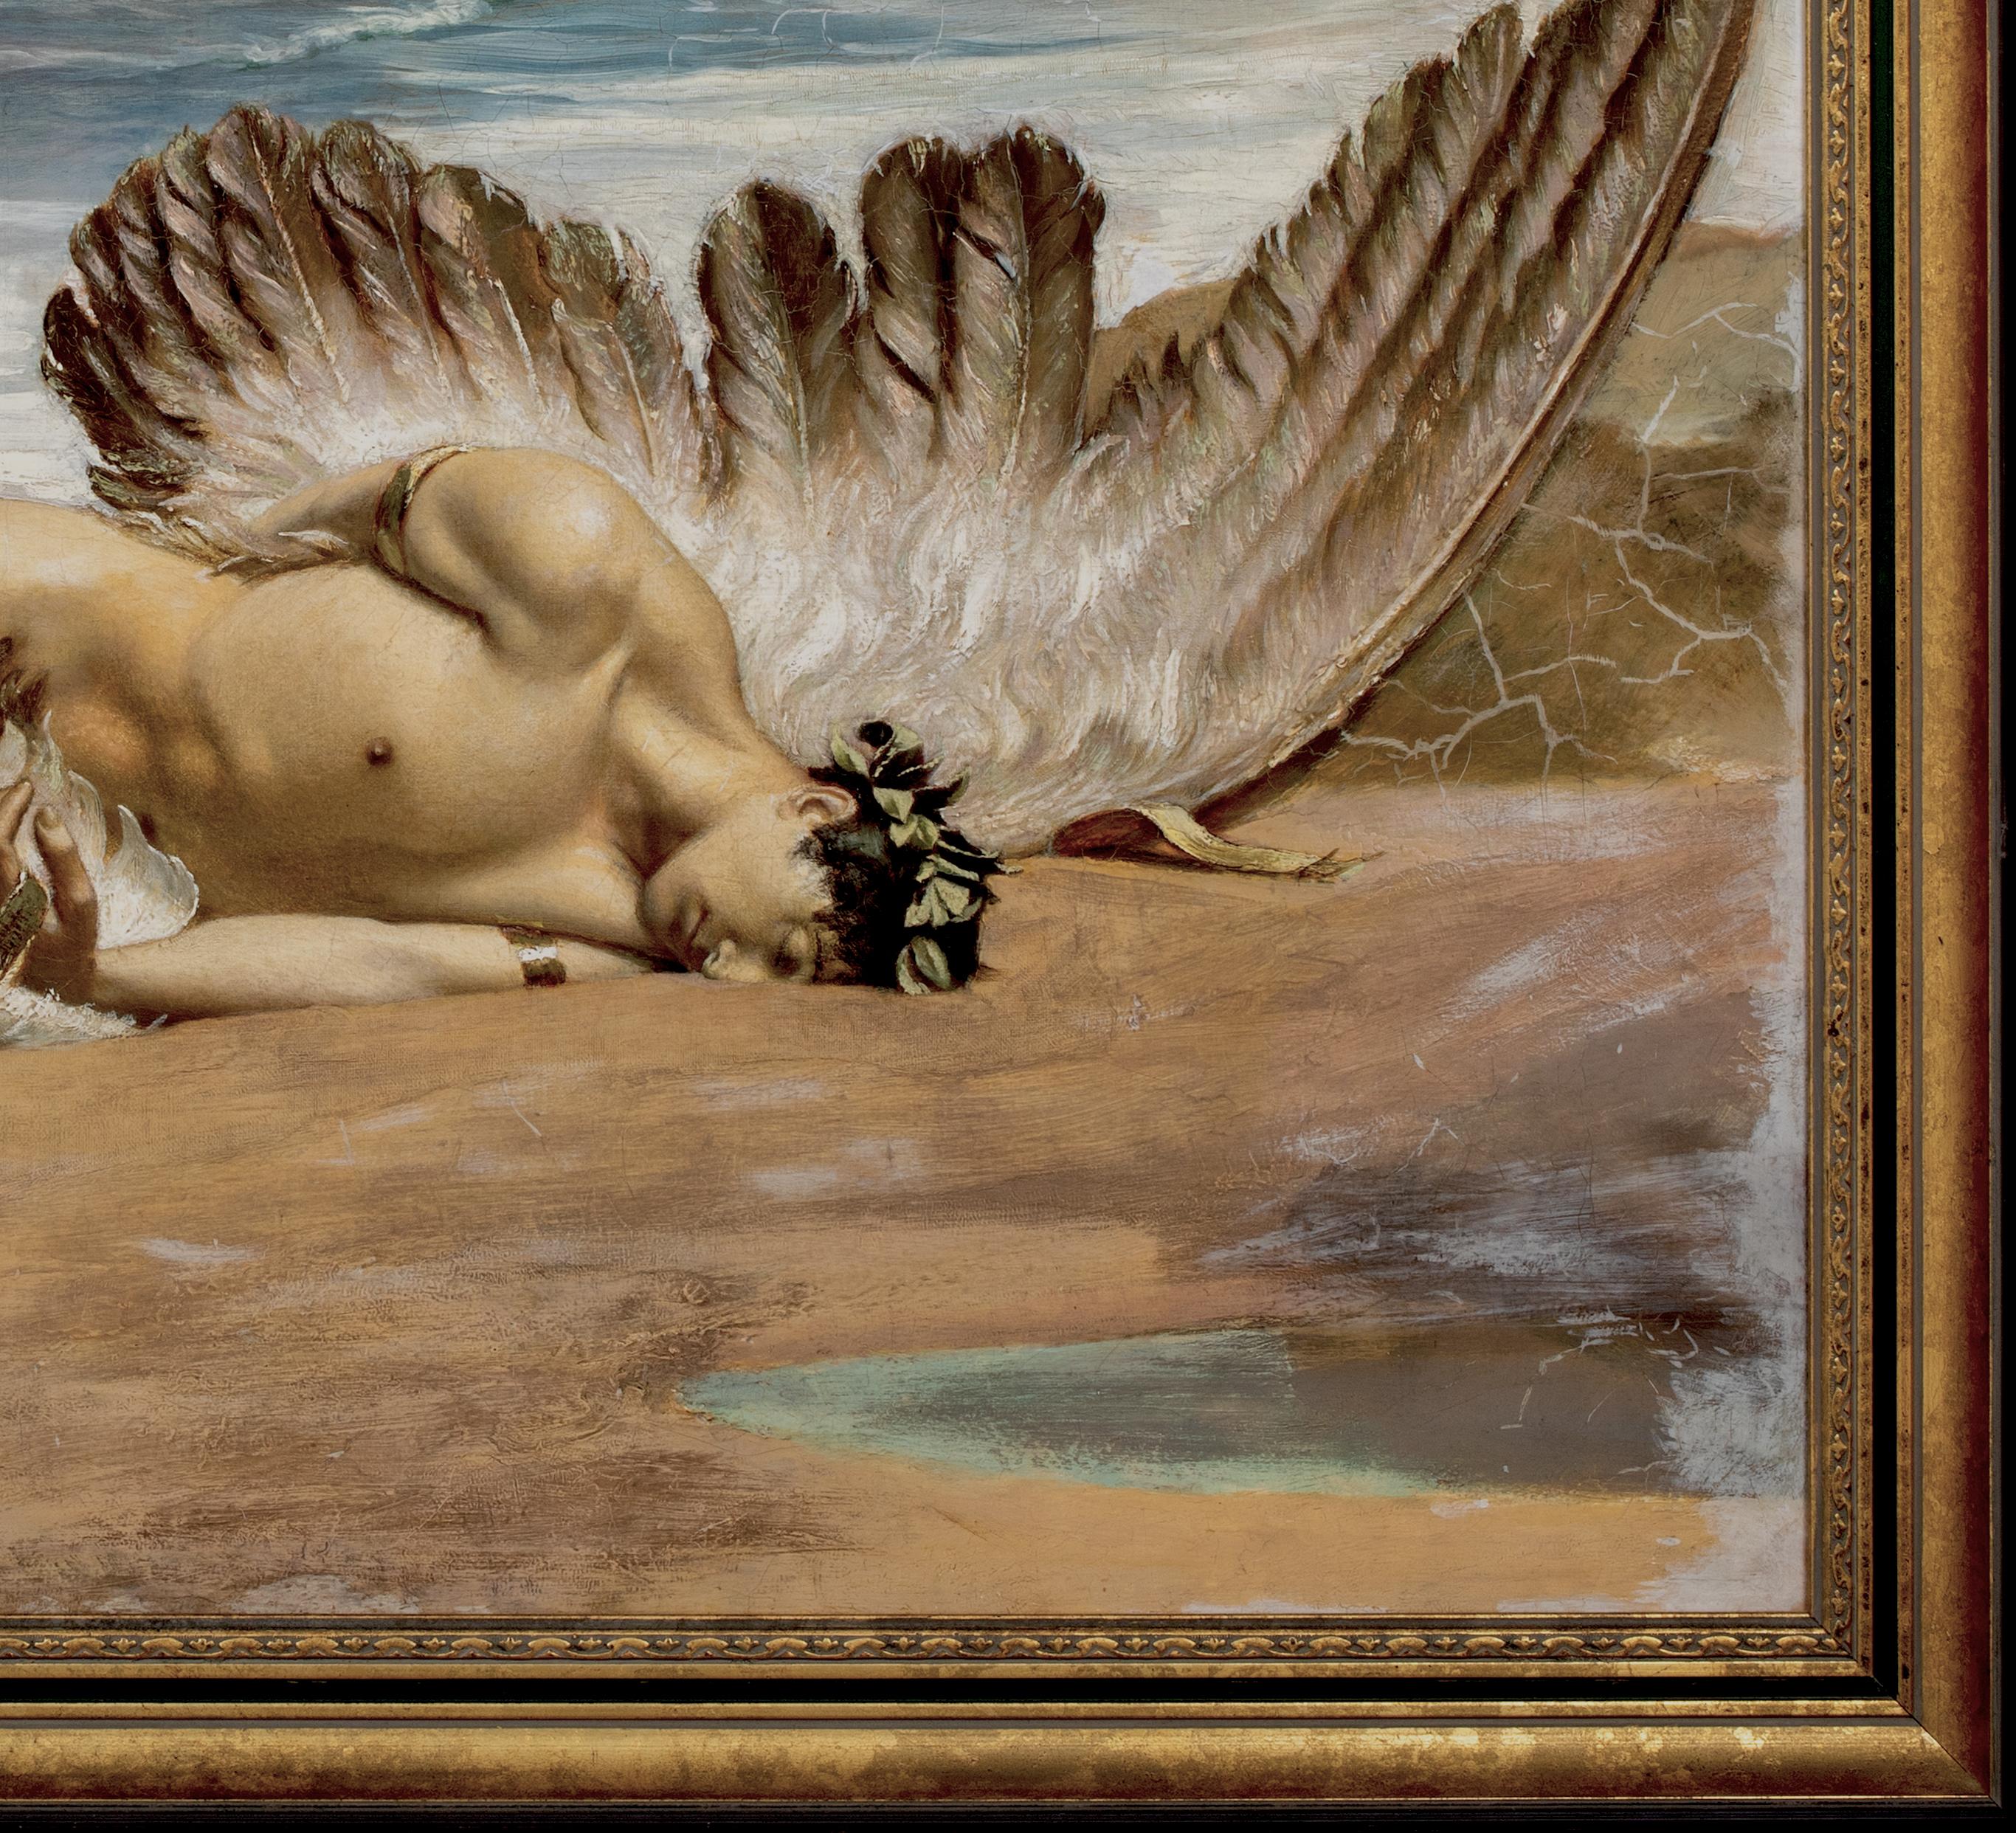 The Death Of Icarus, 19th Century - Alexandre CABANEL (1823-1889) For Sale 1